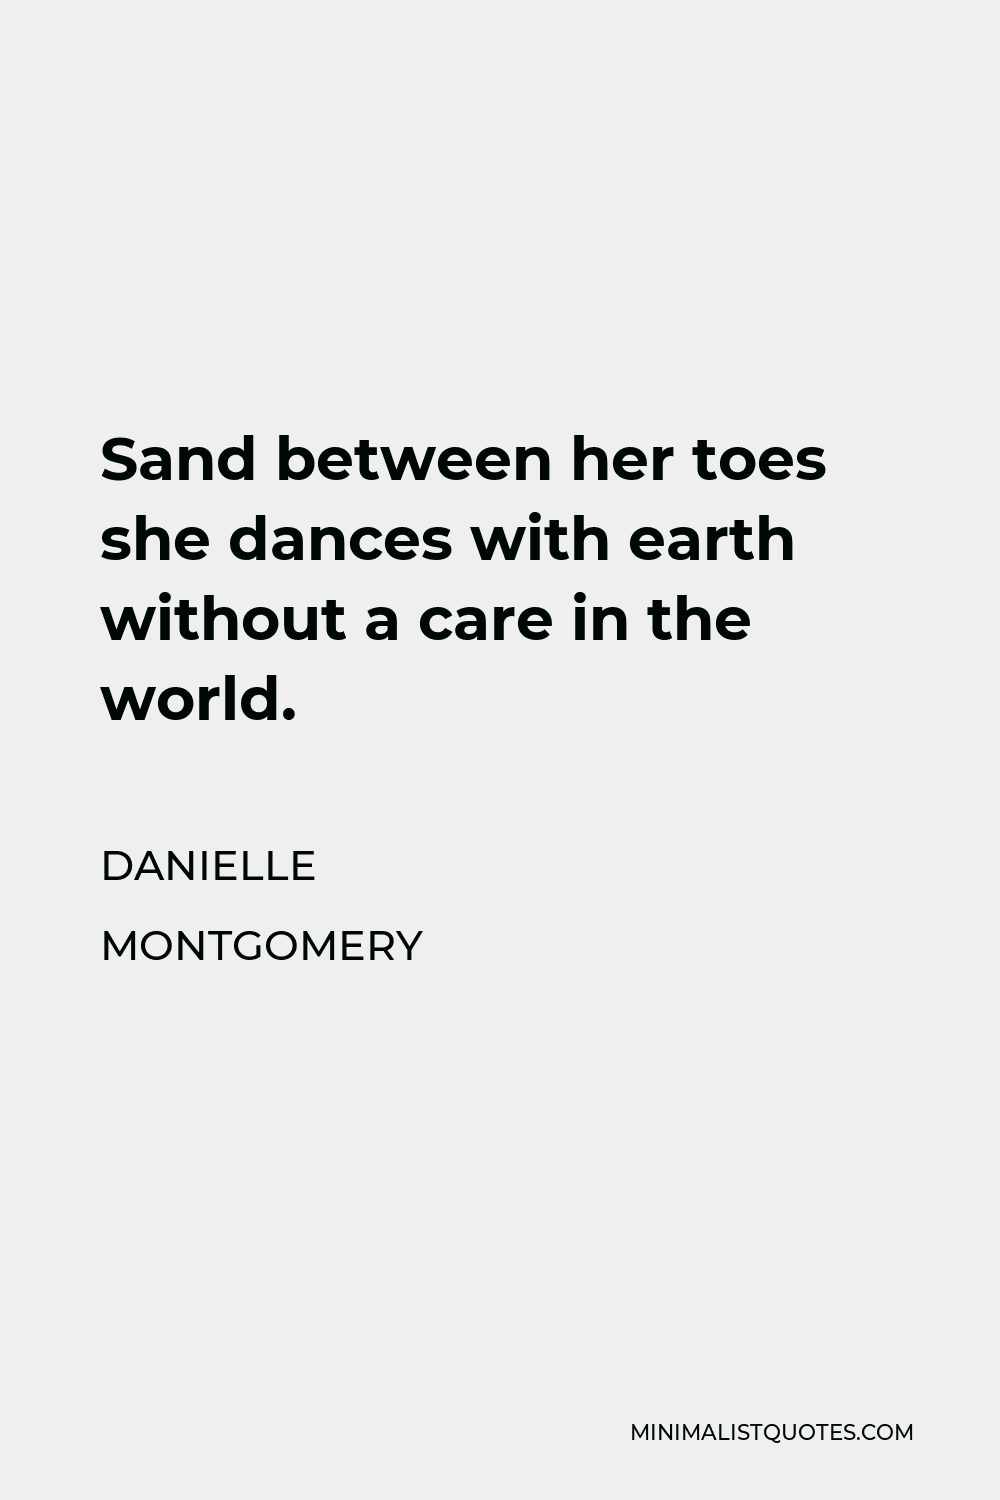 Danielle Montgomery Quote - Sand between her toes she dances with earth without a care in the world.